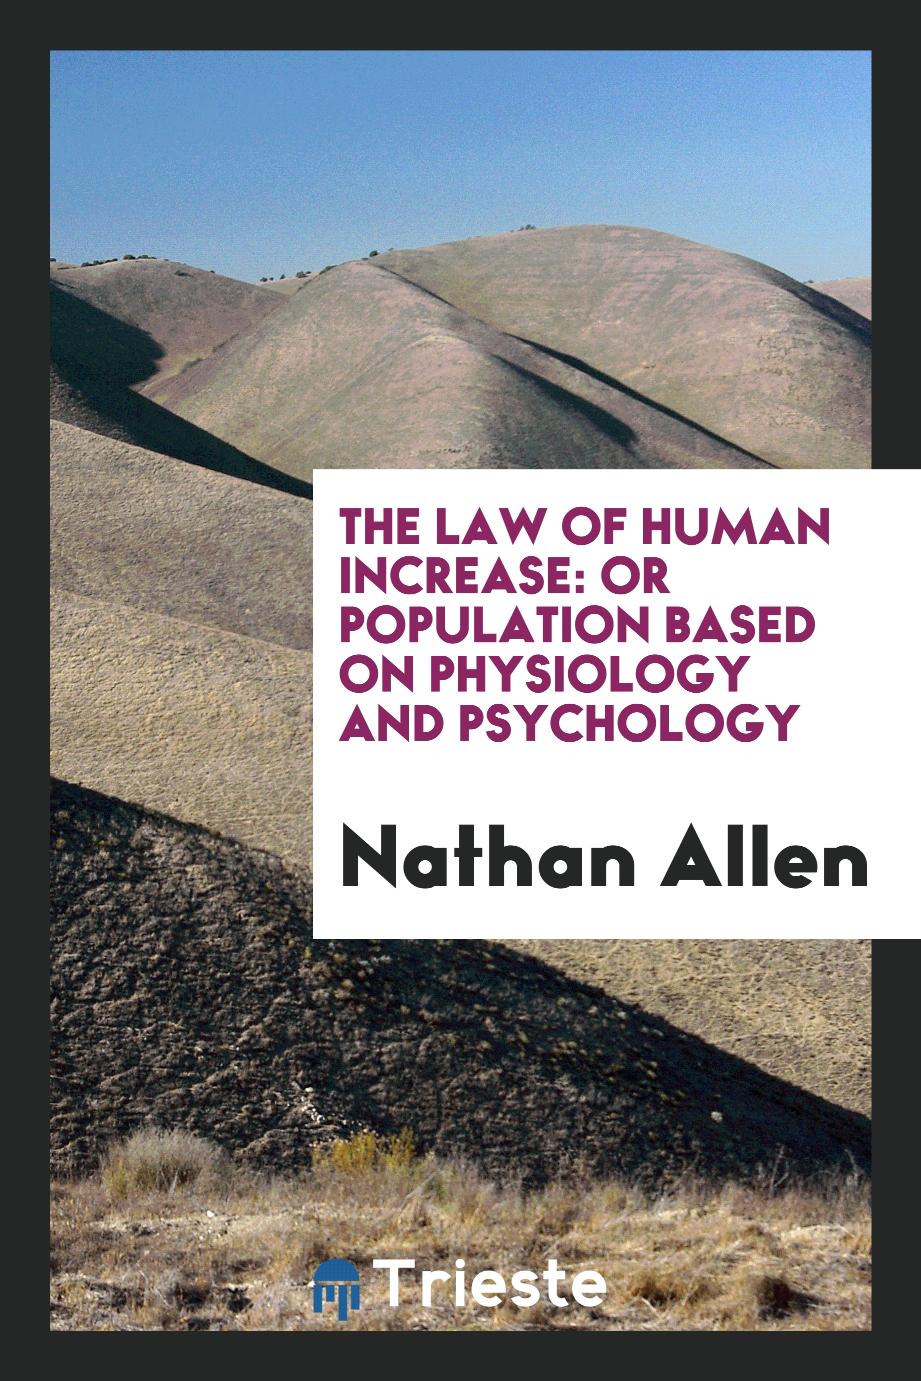 The Law of Human Increase: Or Population Based on Physiology and Psychology